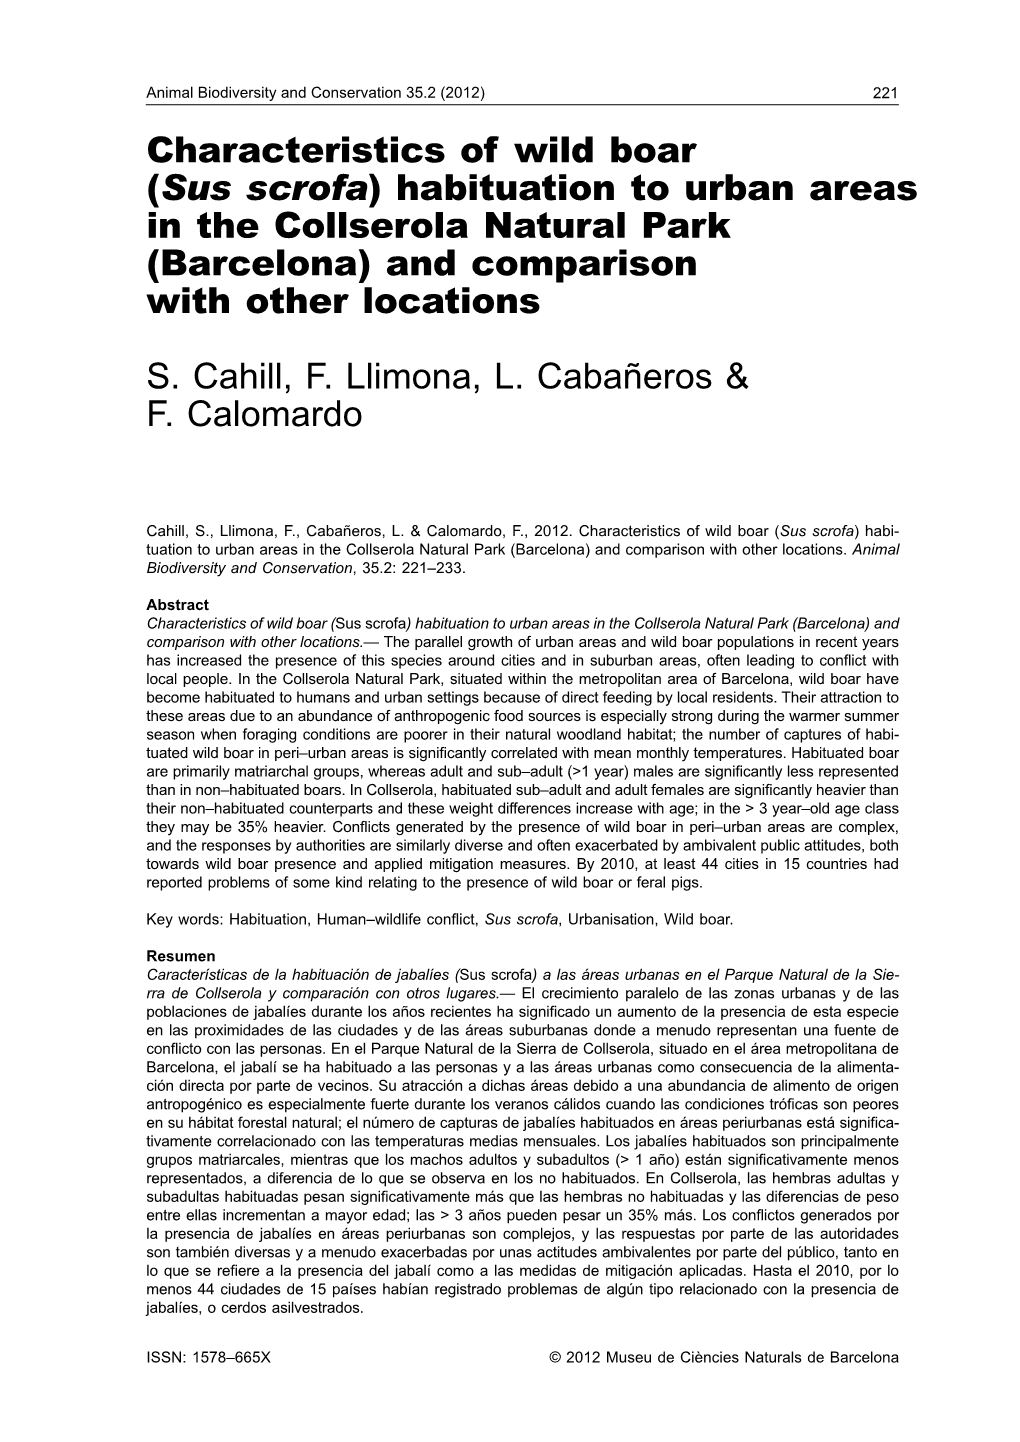 (Sus Scrofa) Habituation to Urban Areas in the Collserola Natural Park (Barcelona) and Comparison with Other Locations